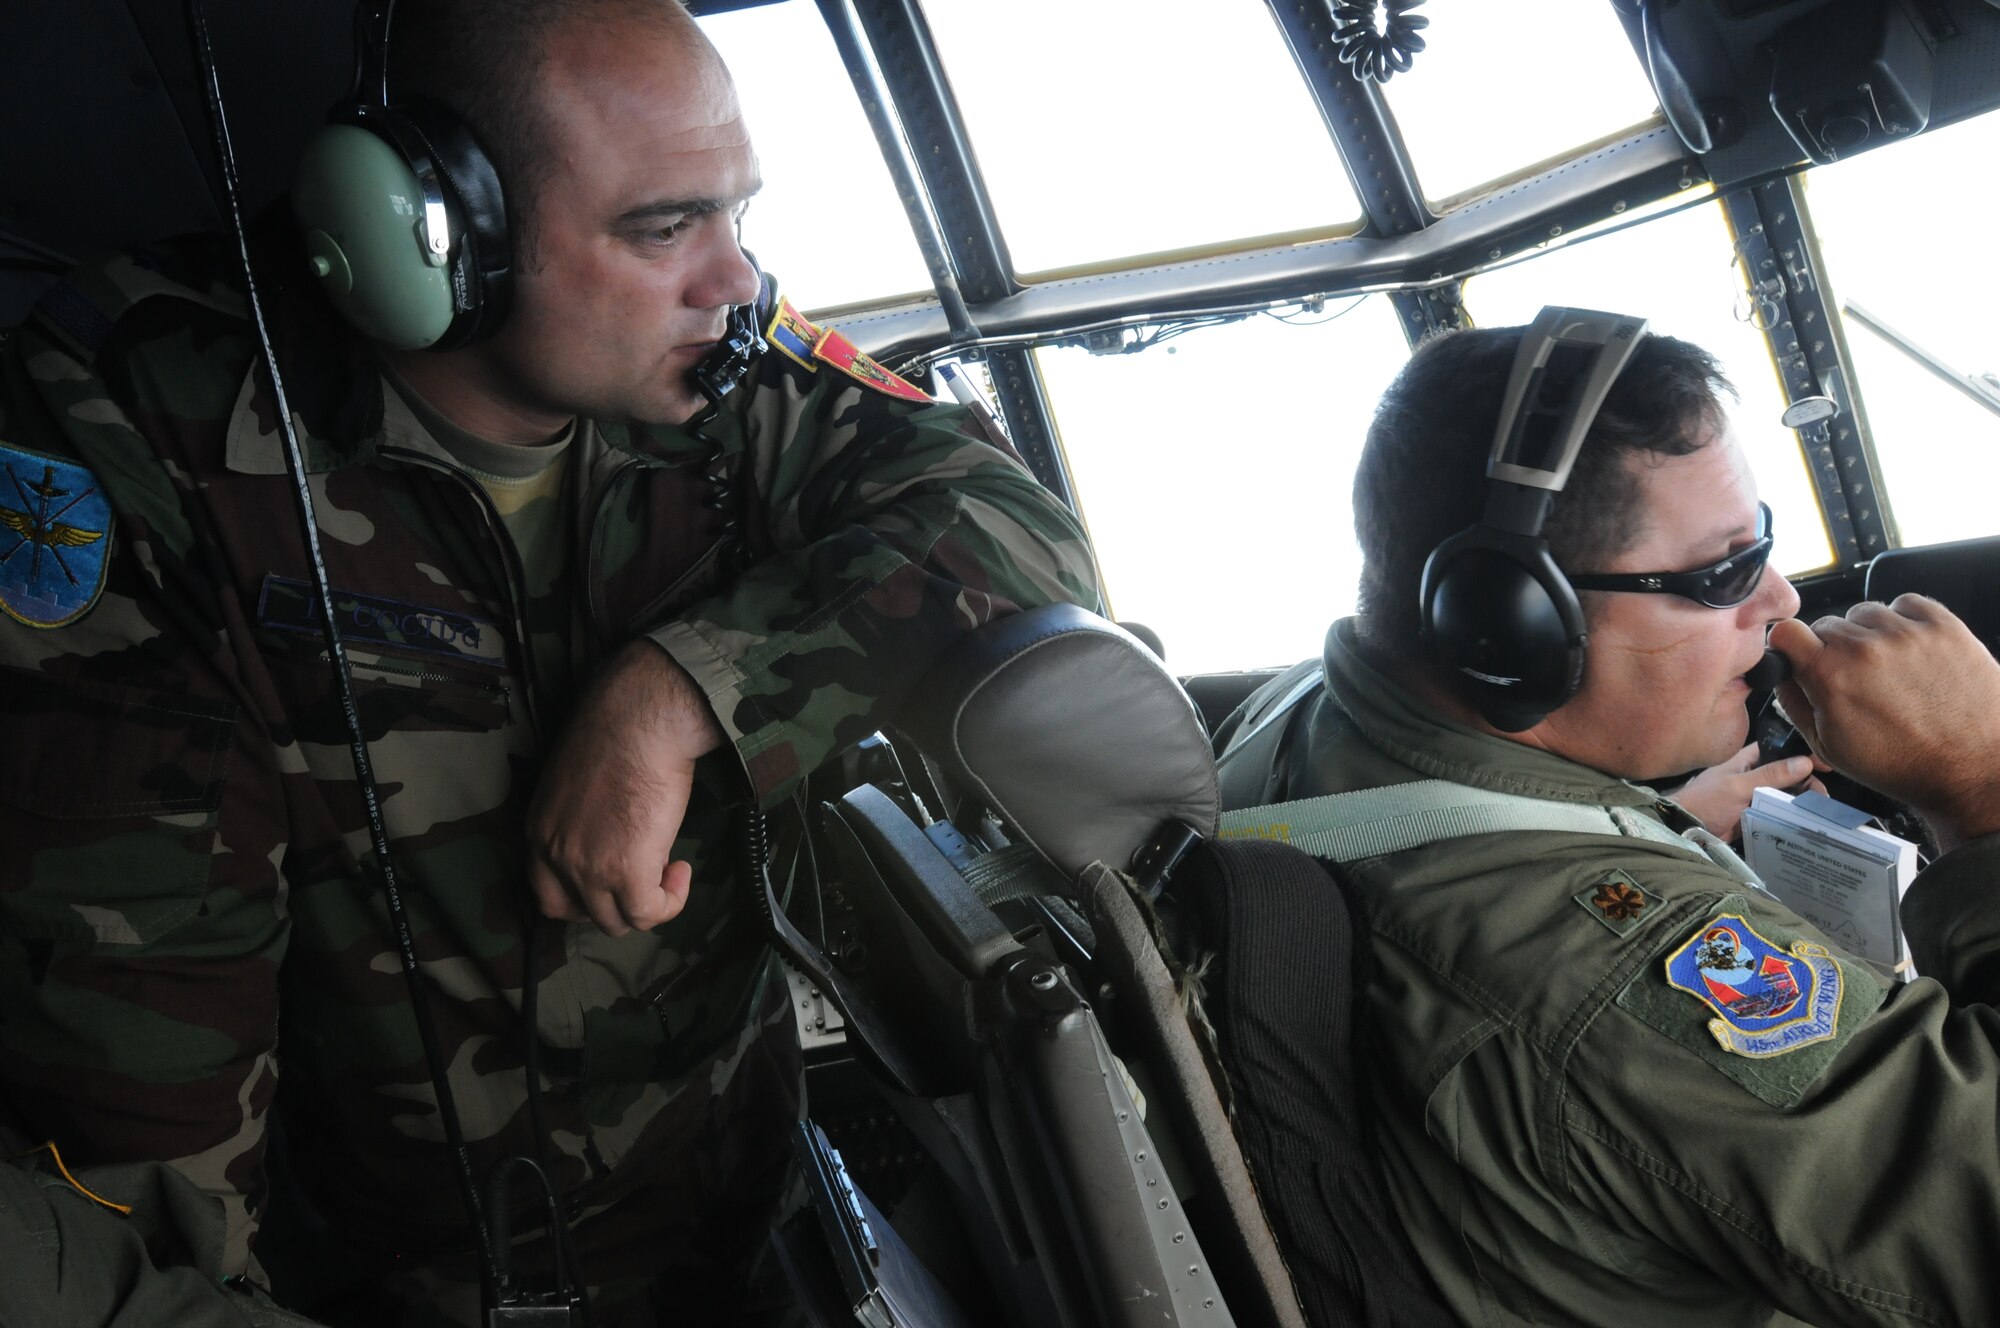 U.S. Air Force Maj. Jon Locklear, right a C-130 Hercules pilot, talks to Moldovan Lt. Col. Ion Vulpe during a medical evacuation check ride over North Carolina July 29, 2010. Vulpe is spending a week with Airmen assigned to the 156th Aeromedical Evacuation Squadron, North Carolina National Guardsmen to learn medical evacuation techniques. (DoD photo by Tech. Sgt. Brian E. Christiansen, U.S. Air Force/Released)